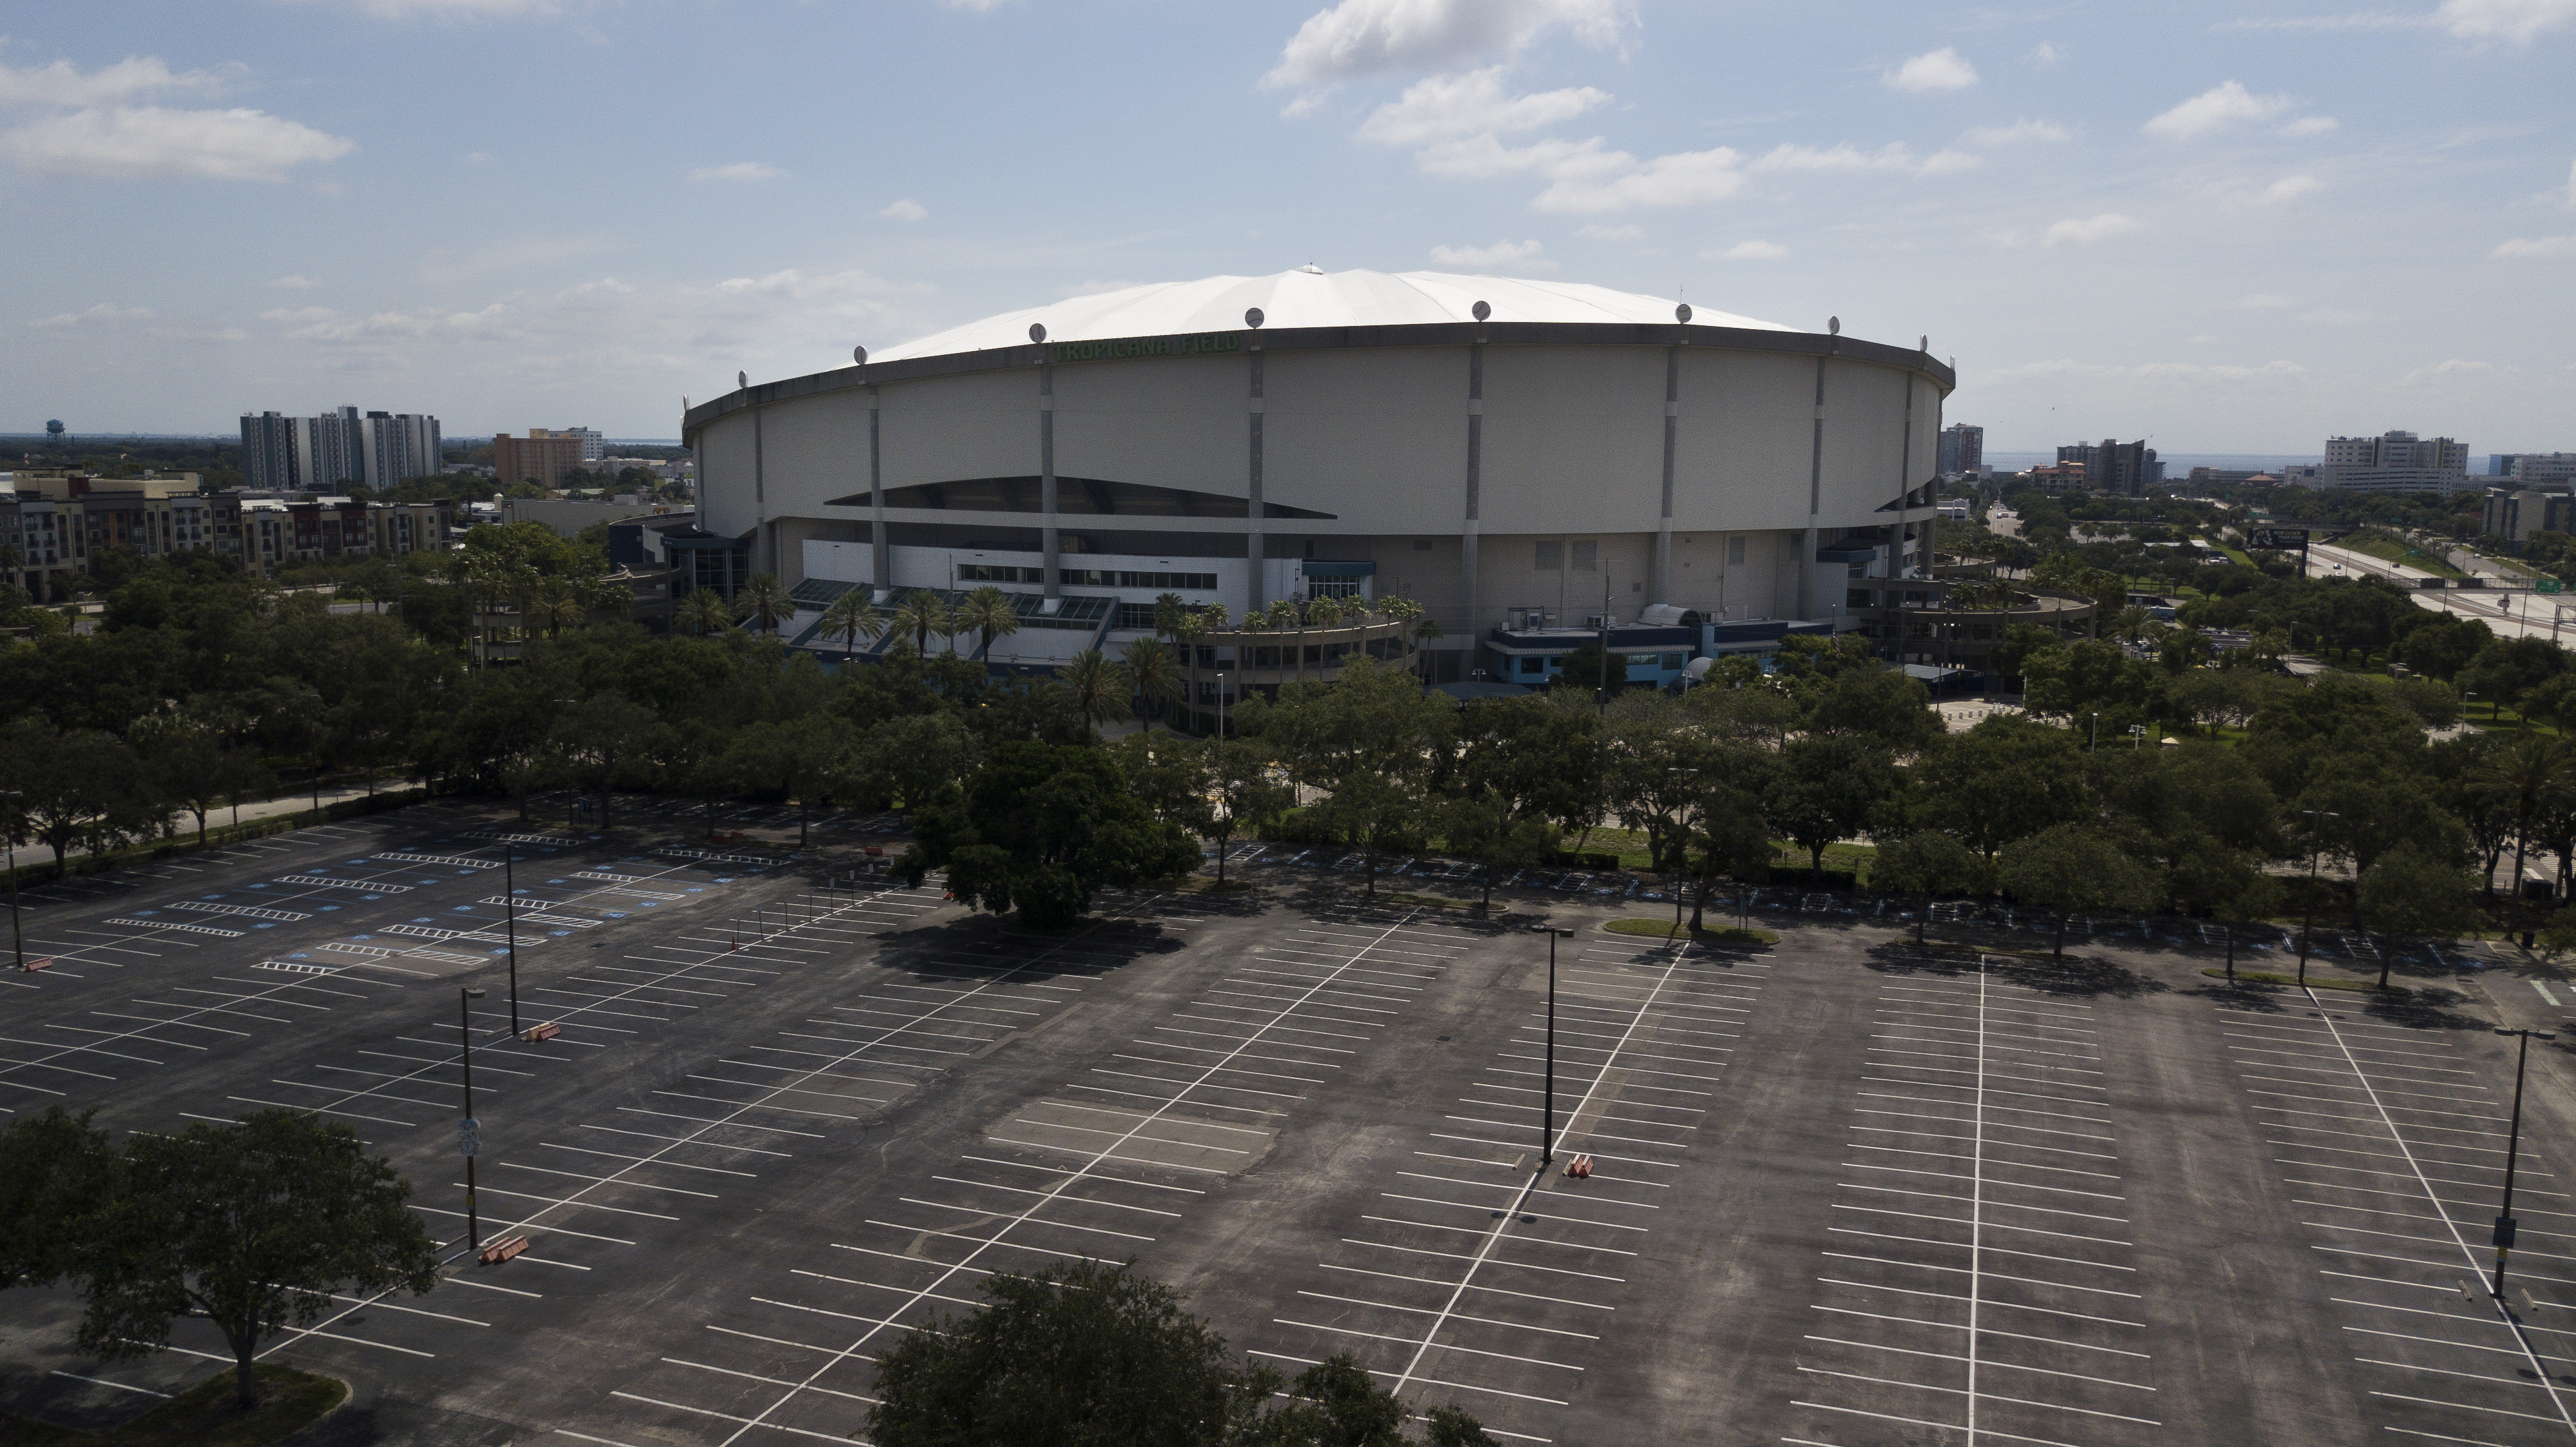 3 possible graves found under parking lots at Tampa Bay Rays stadium, Trending